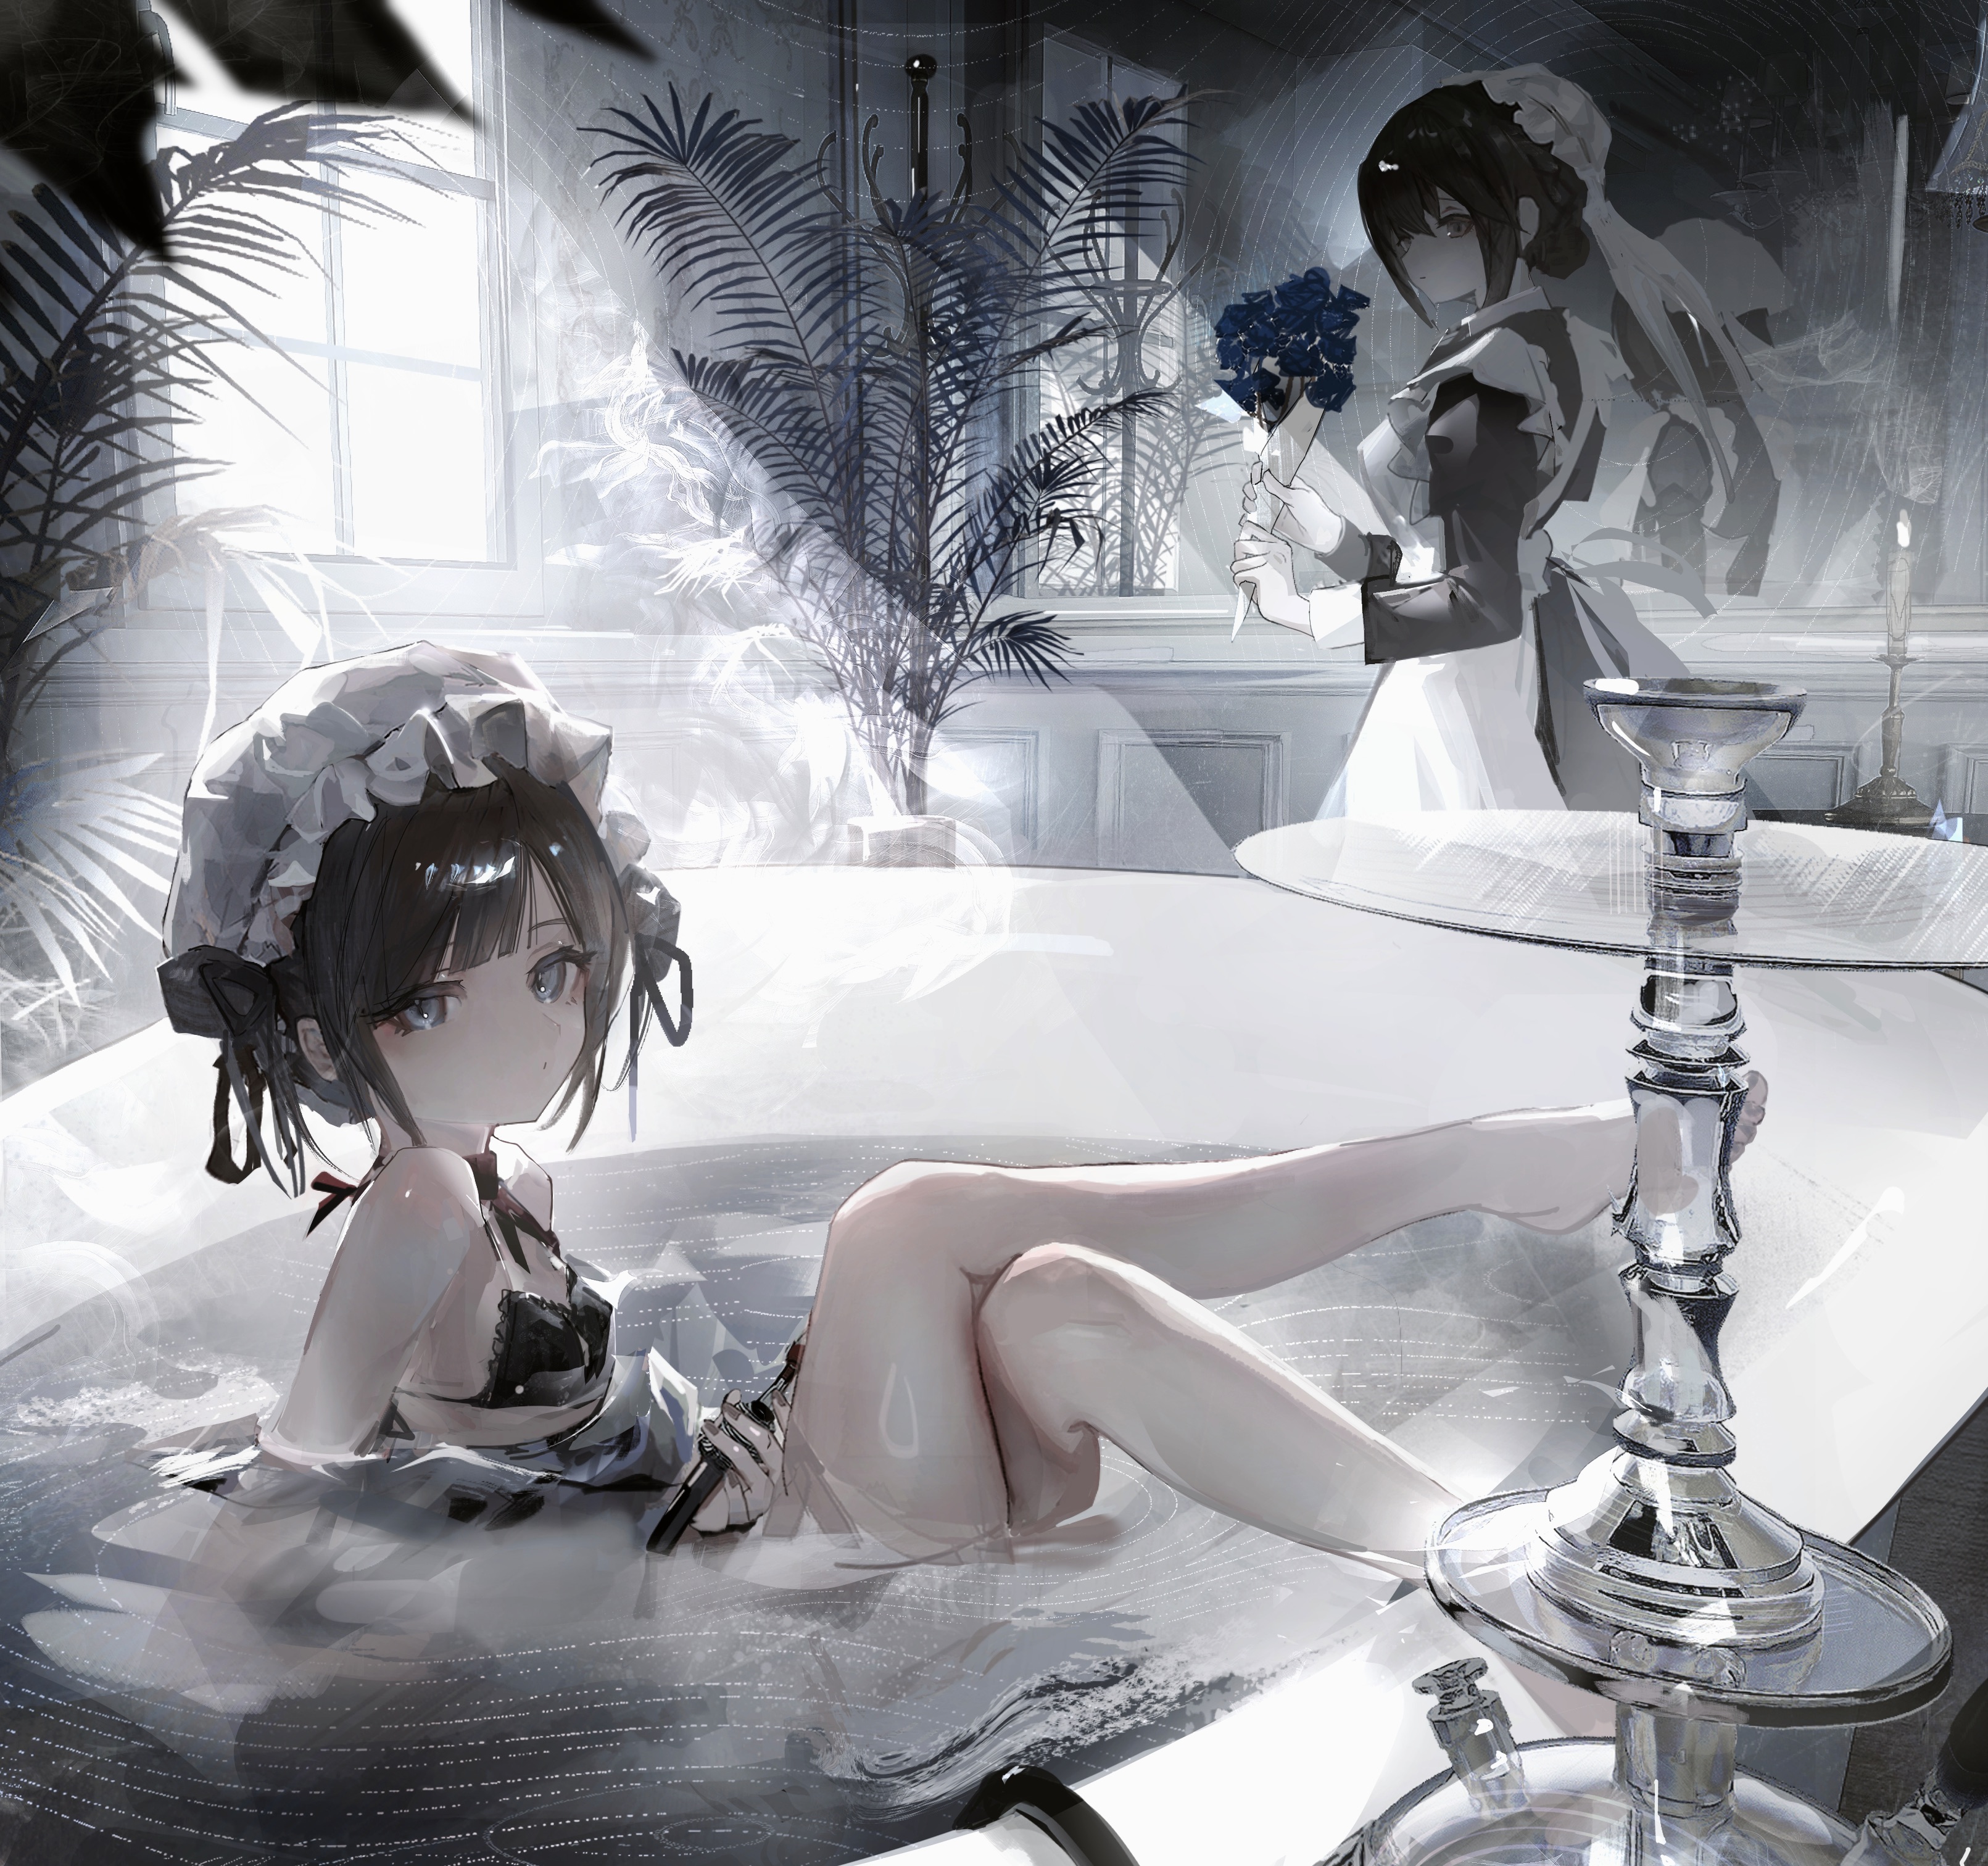 Anime 3222x3024 wet maid bathing anime anime girls original characters water misumigumi in water looking at viewer short hair long hair long sleeves legs crossed pointed toes women indoors bathtub two women plants maid outfit reflection blue eyes dark hair